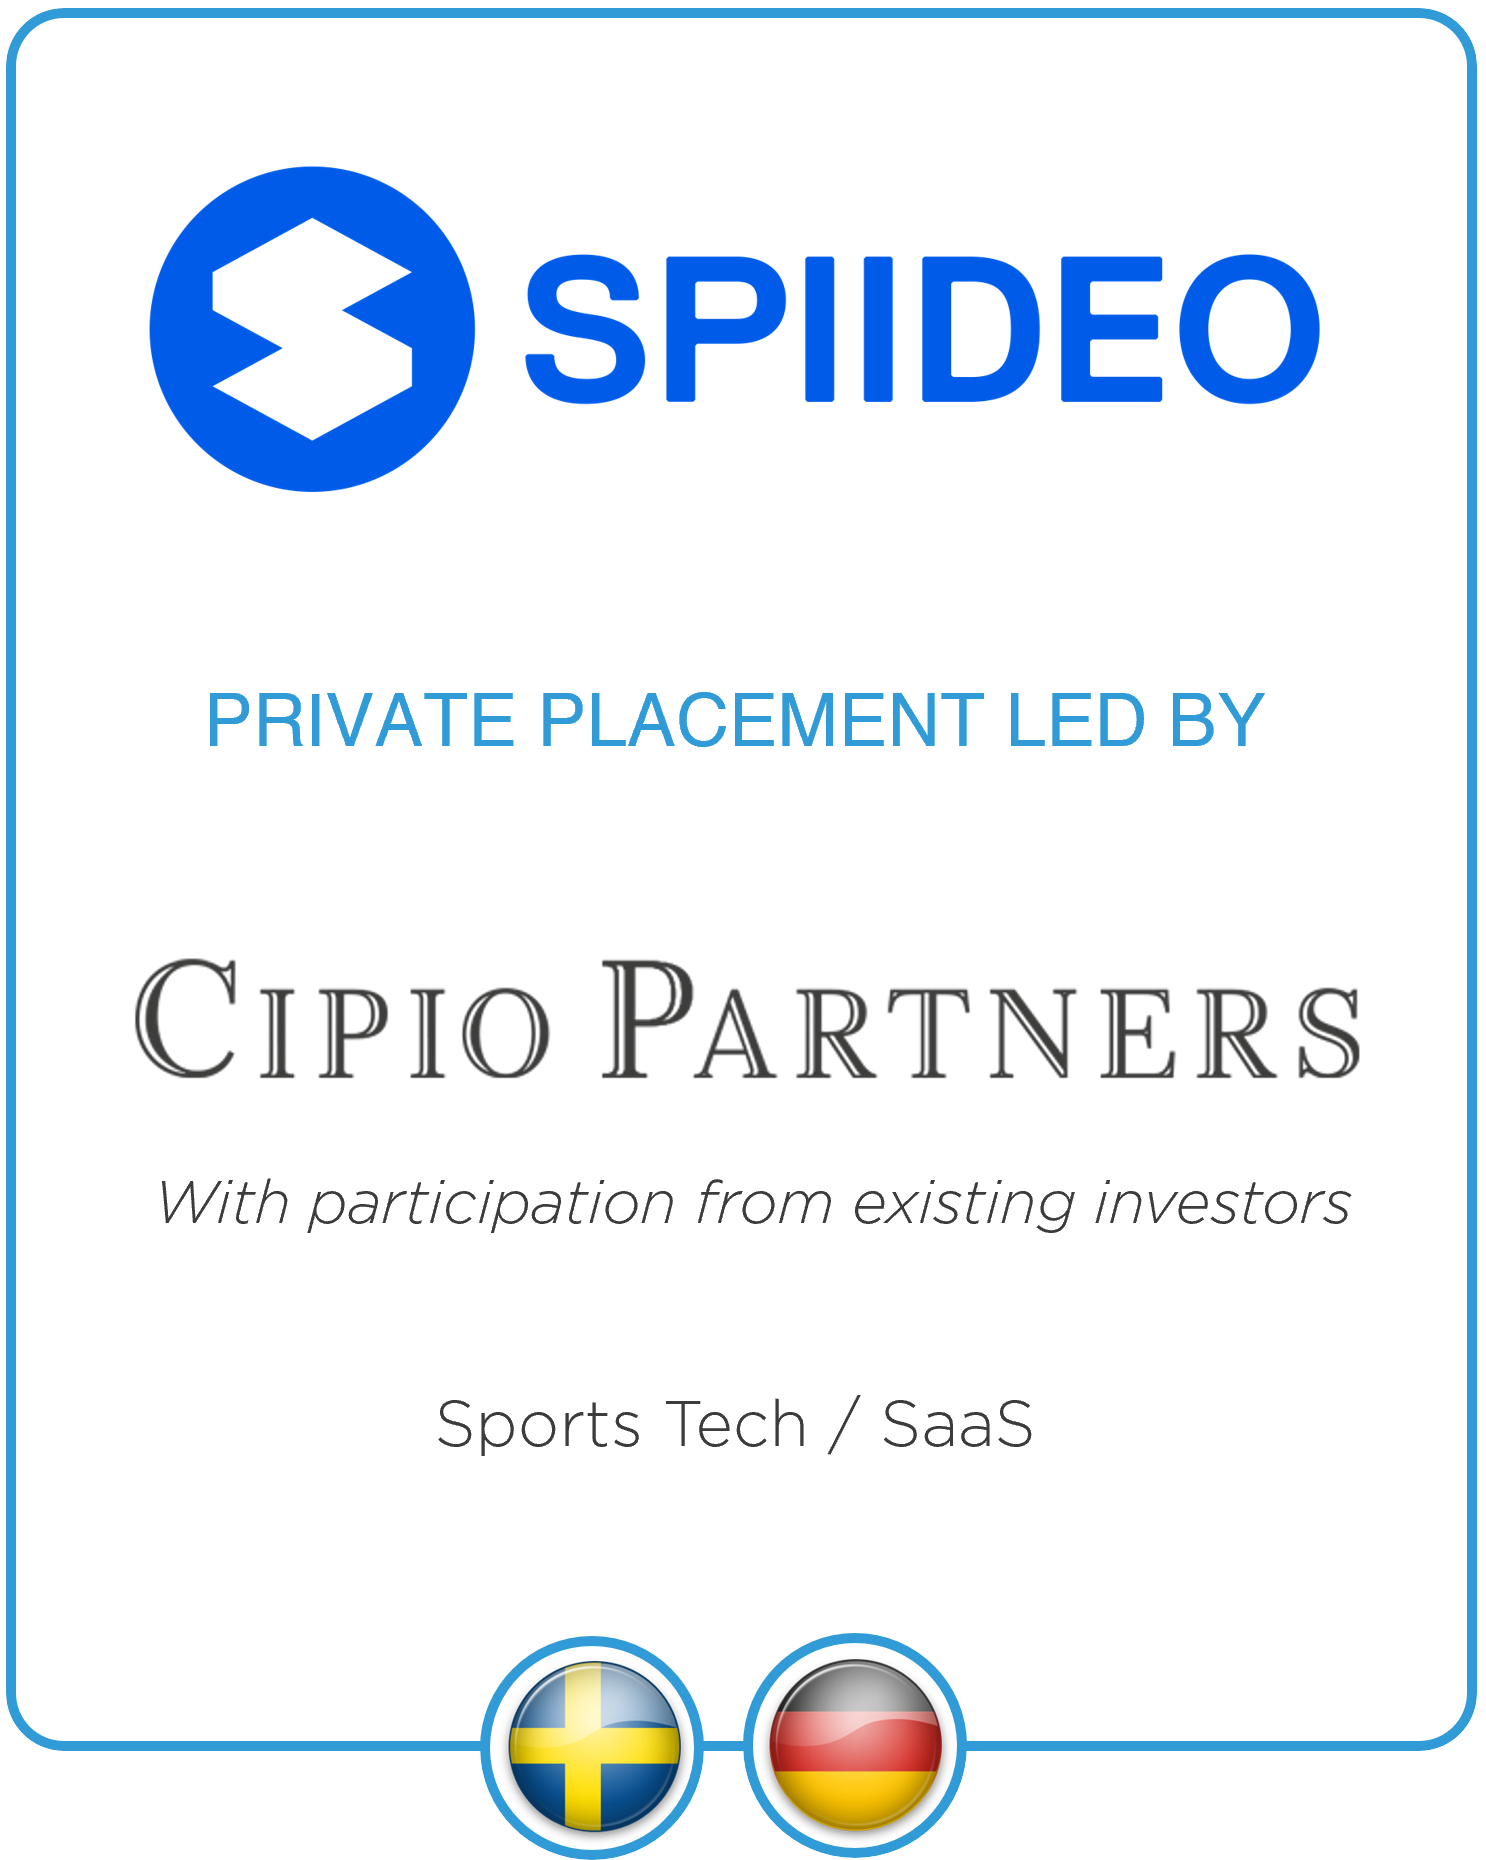 Drake Star Acts as Exclusive Financial Advisor to Spiideo on its Private Placement led by Cipio Partners